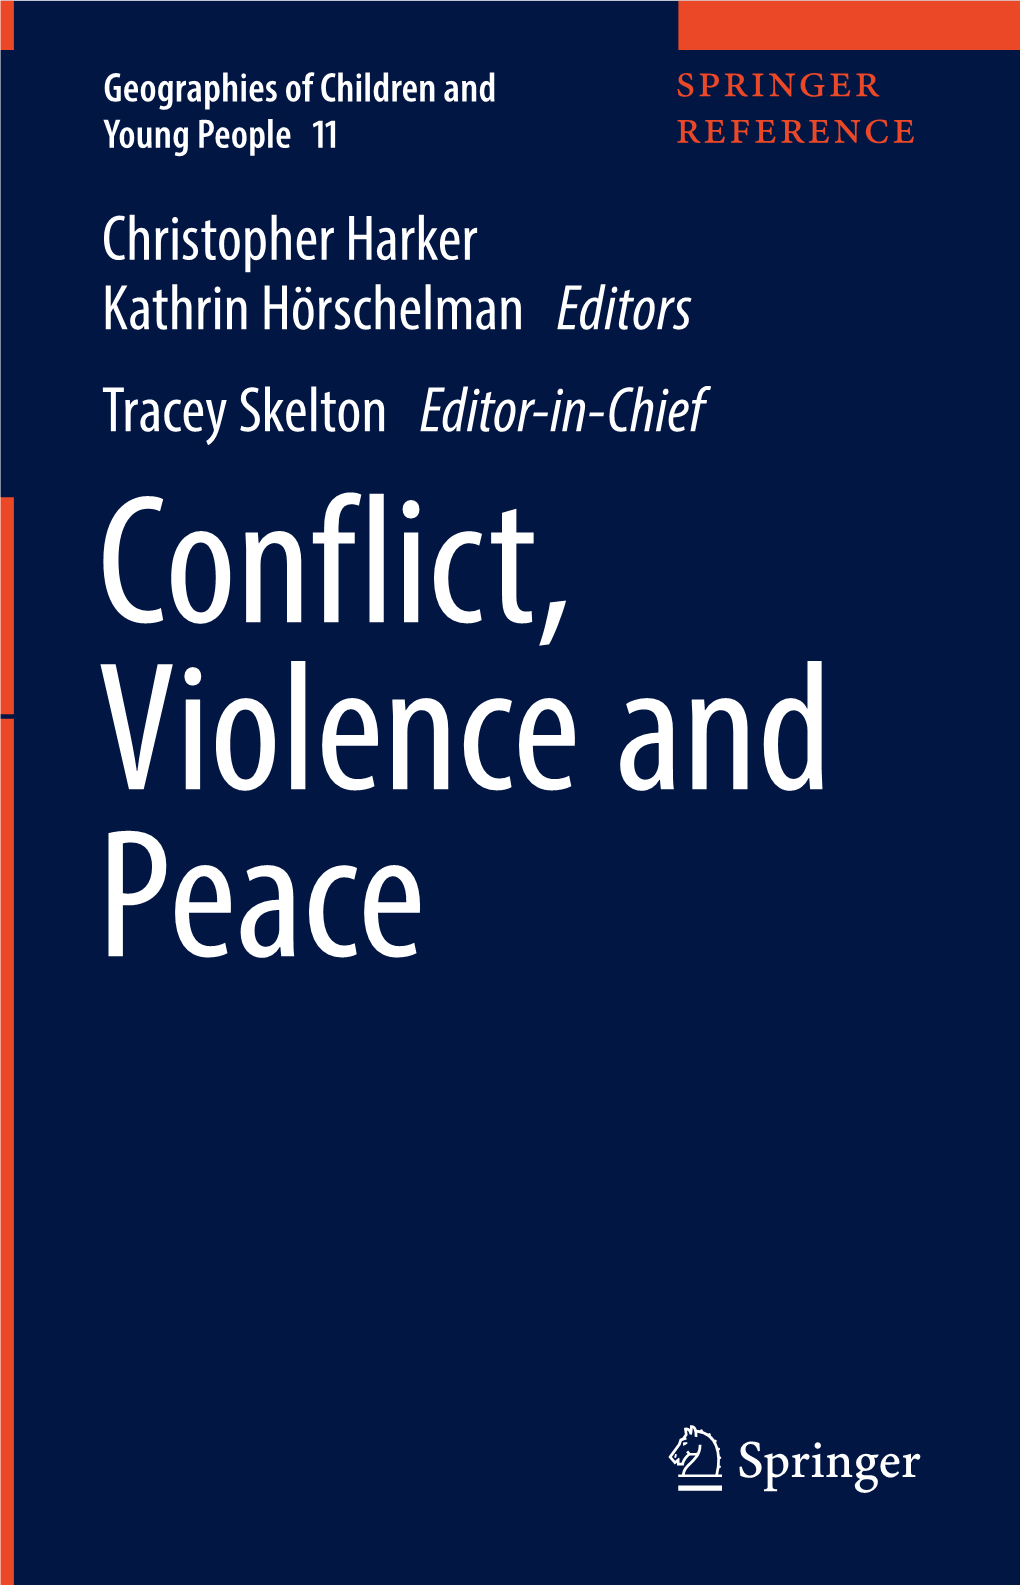 Christopher Harker Kathrin Hörschelman Editors Tracey Skelton Editor-In-Chief Conflict, Violence and Peace Geographies of Children and Young People